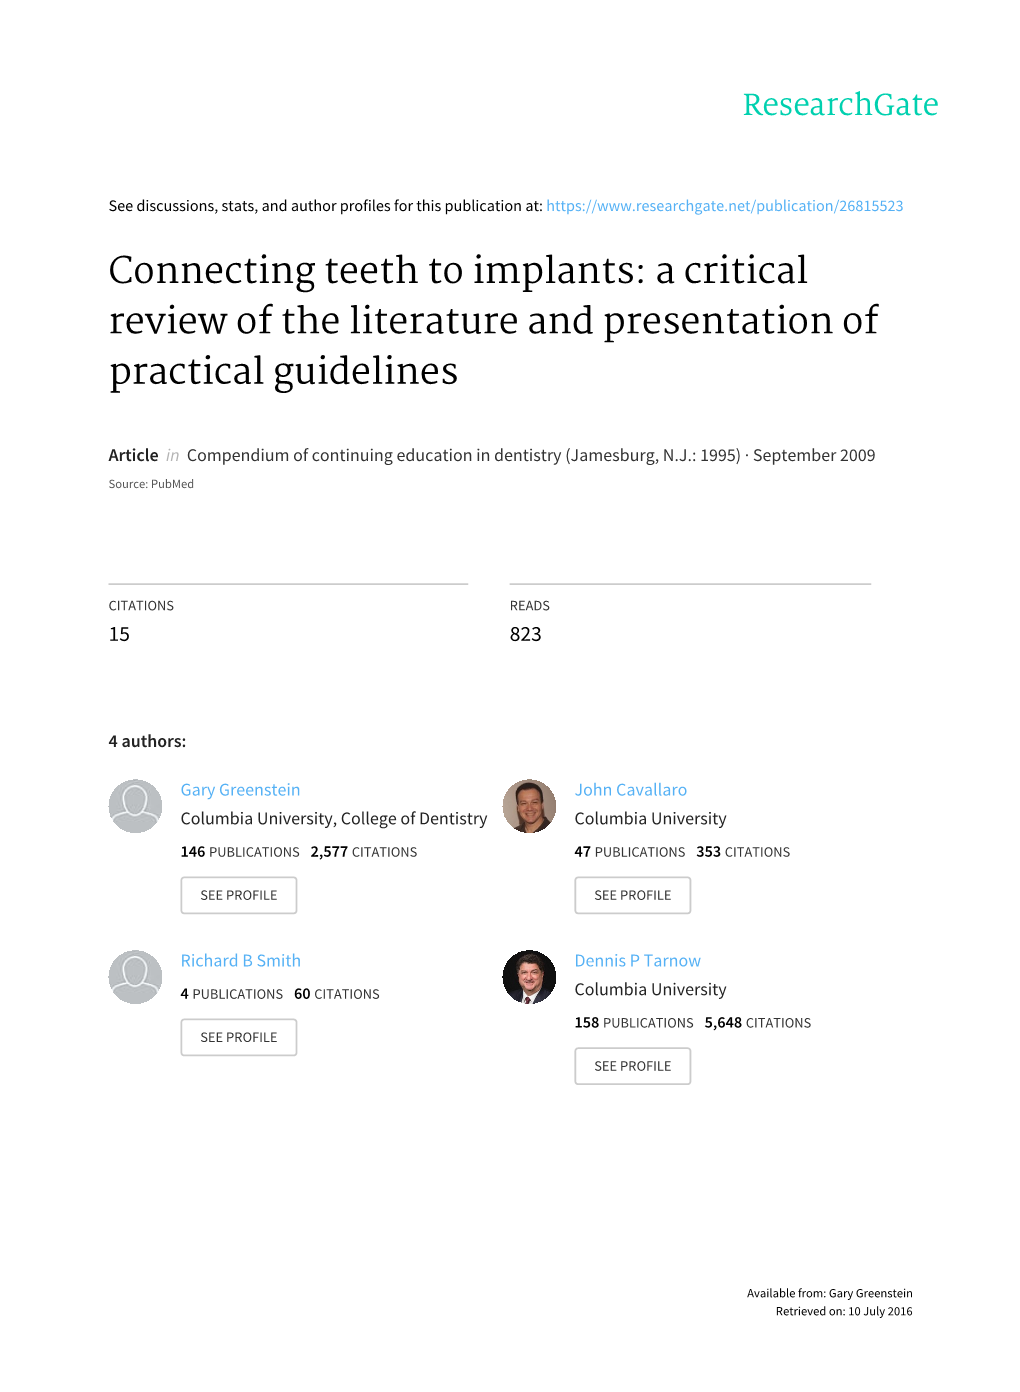 Connecting Teeth to Implants: a Critical Review of the Literature and Presentation of Practical Guidelines